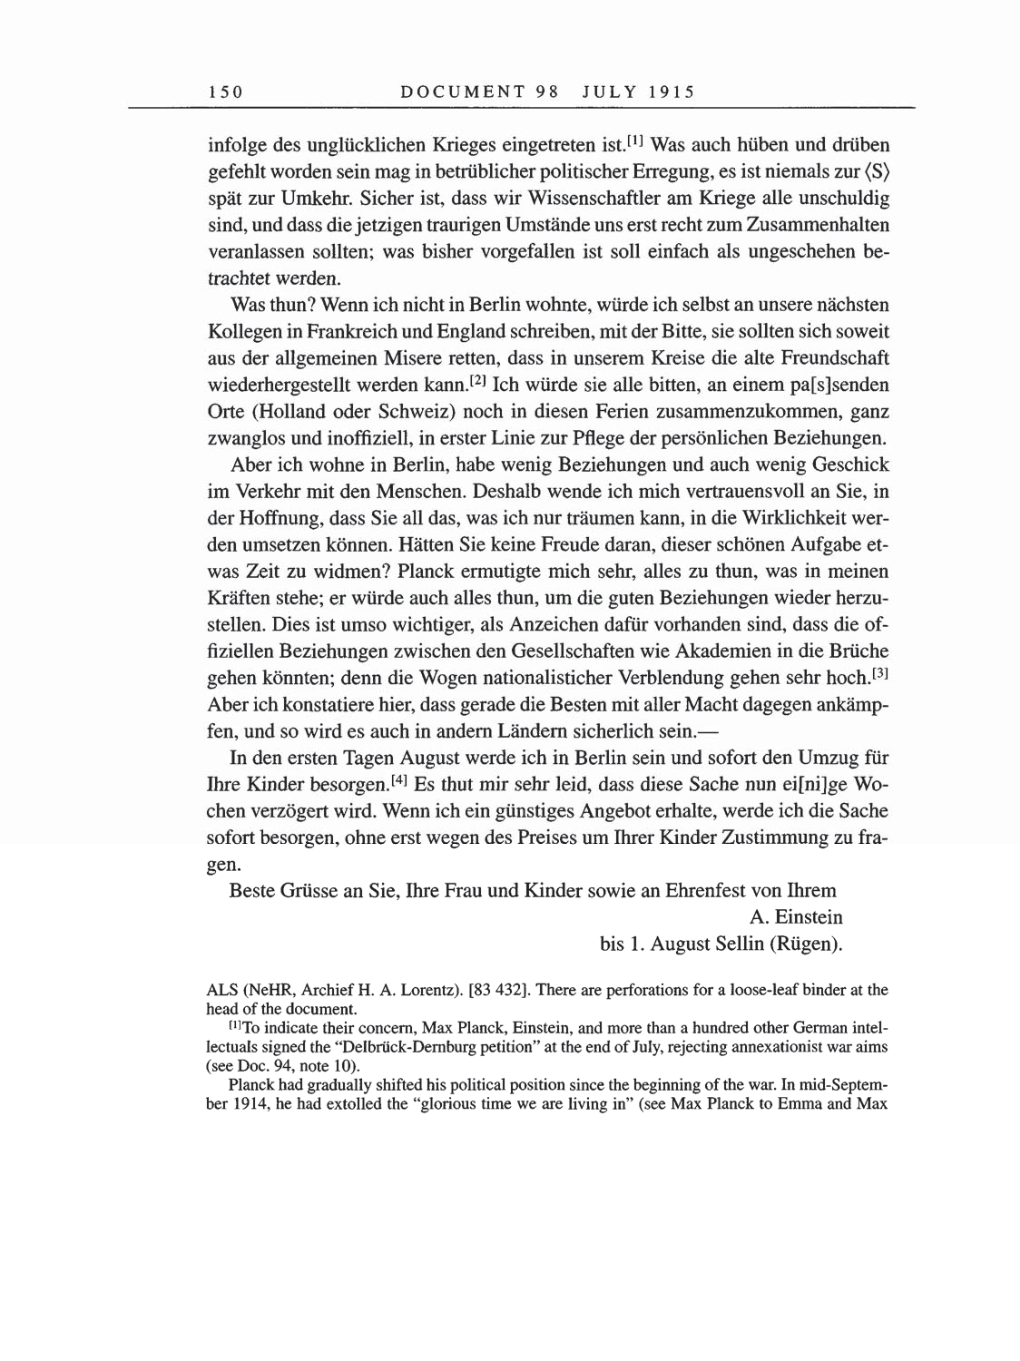 Volume 8, Part A: The Berlin Years: Correspondence 1914-1917 page 150